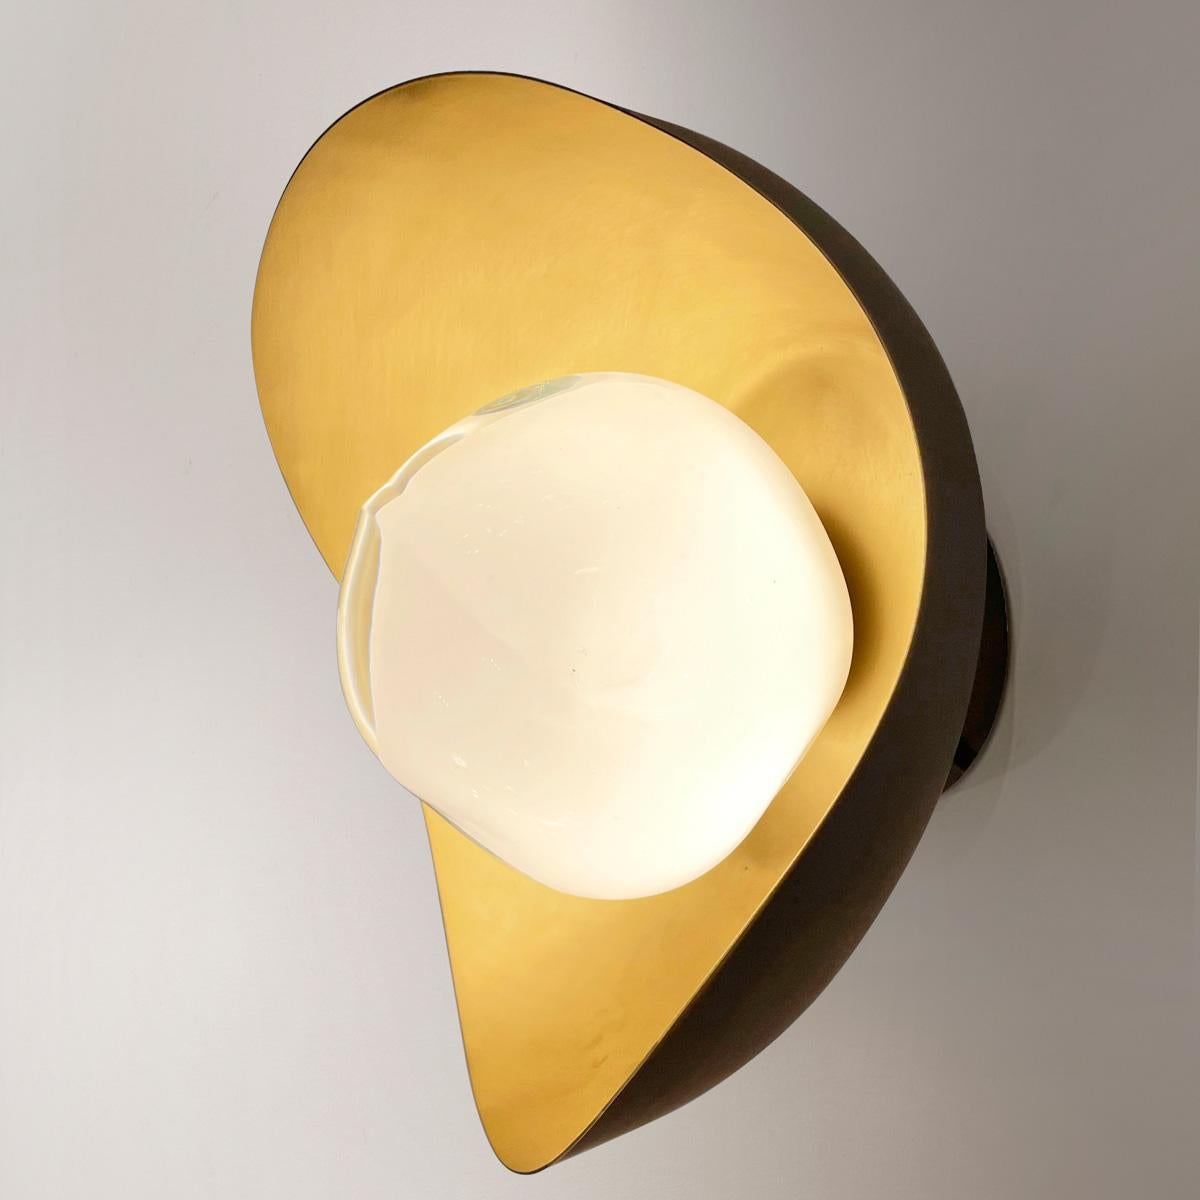 The Perla wall light features an organic brass shell nestling our Sfera glass handblown in Tuscany. The first images show the fixture with a satin brass interior and Bronzo Nuvolato (bronze) exterior finish-subsequent pictures show it in a selection